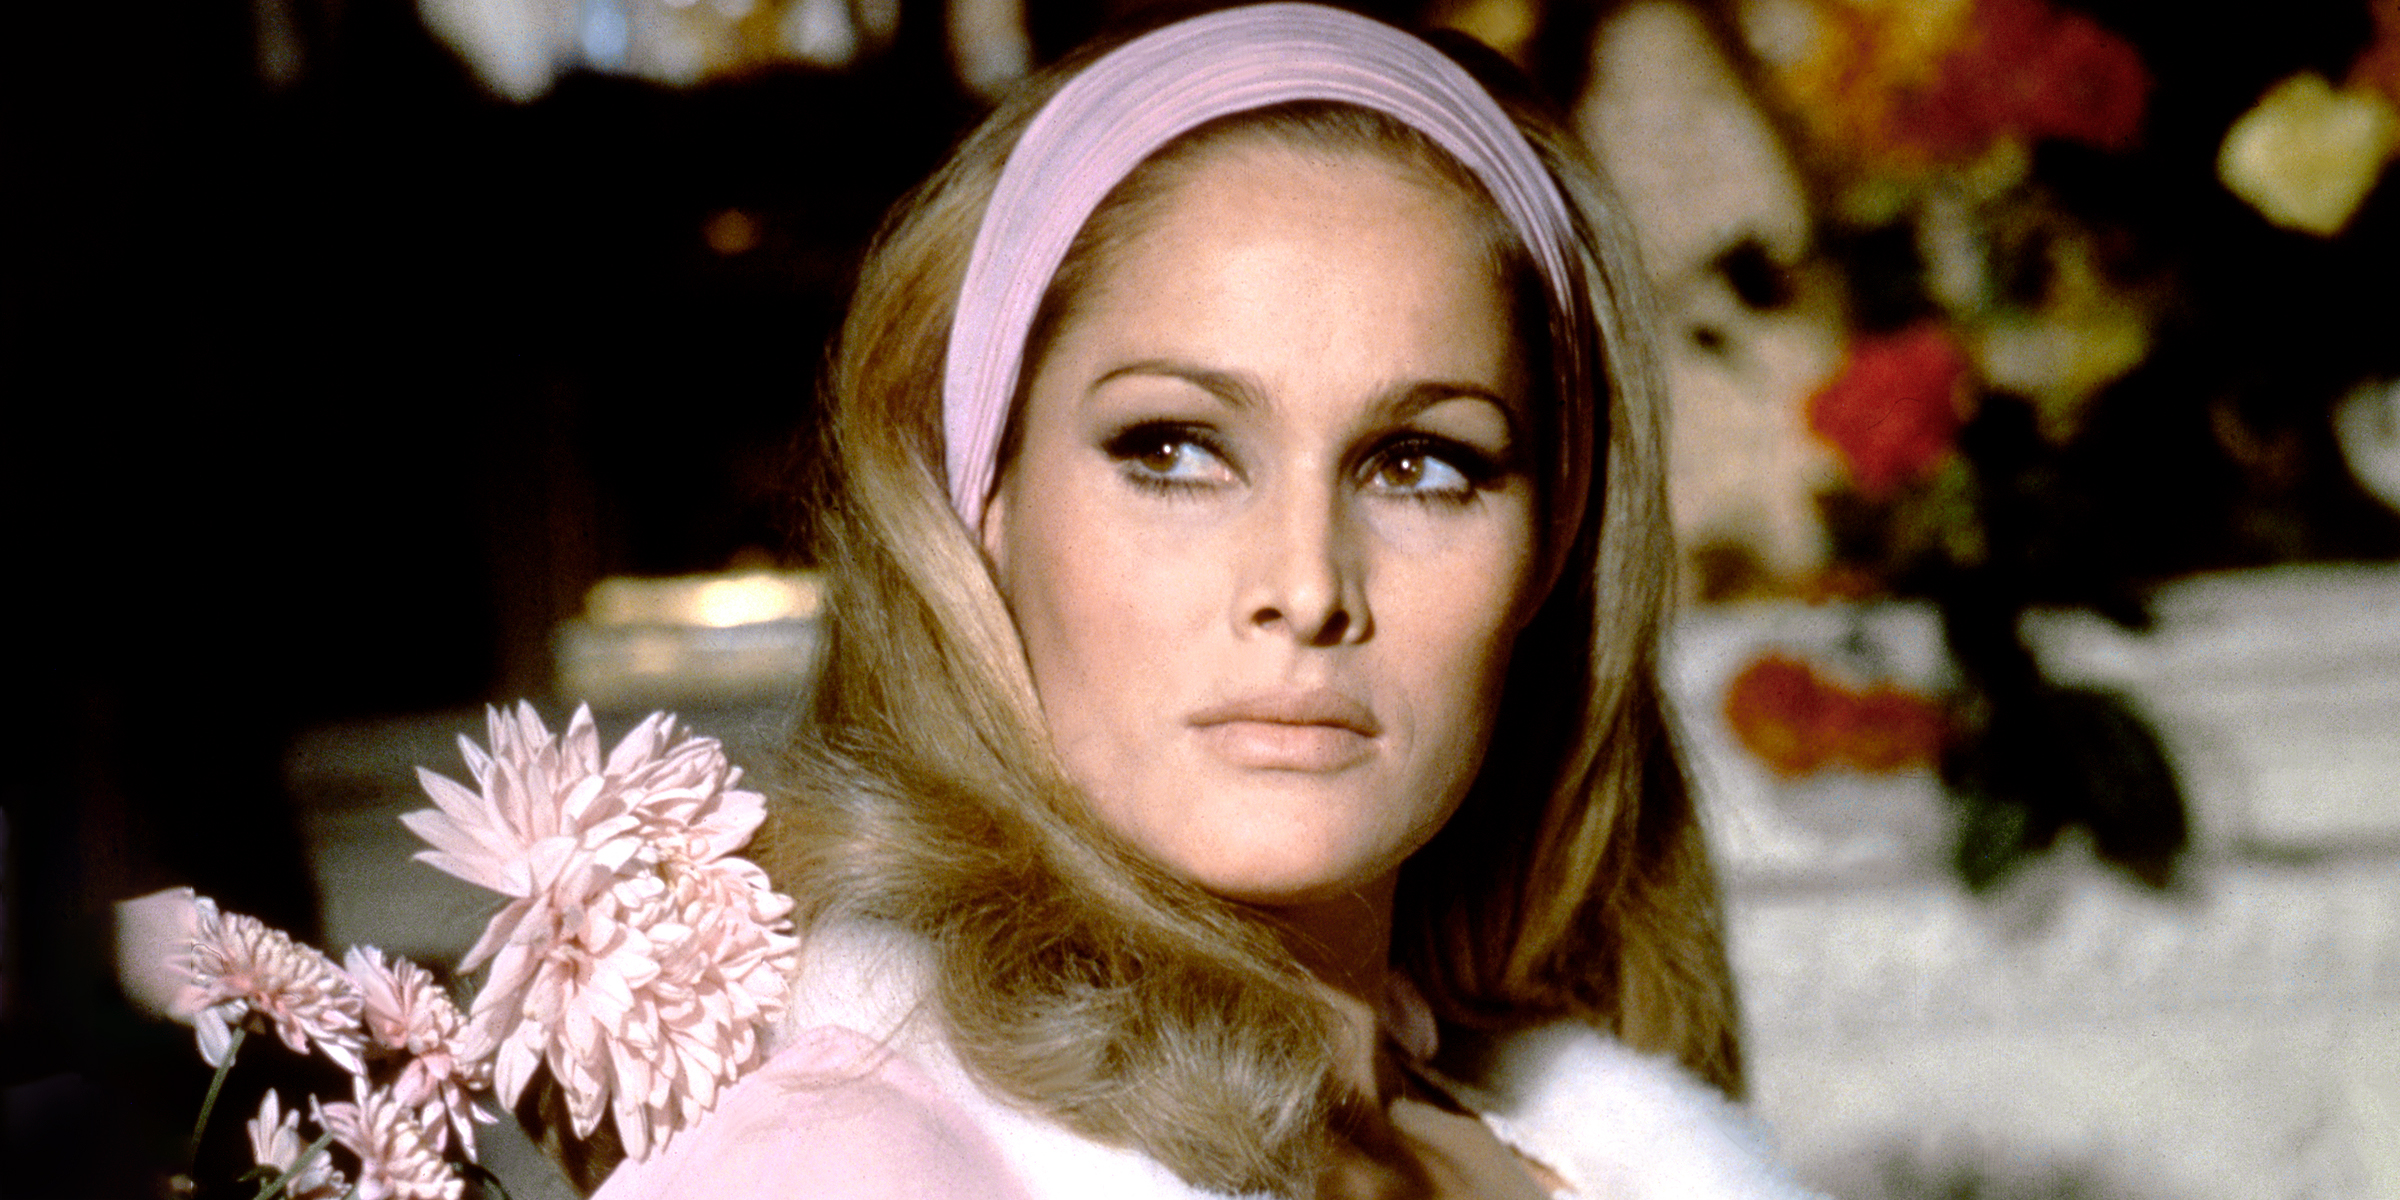 Ursula Andress | Source: Getty Images